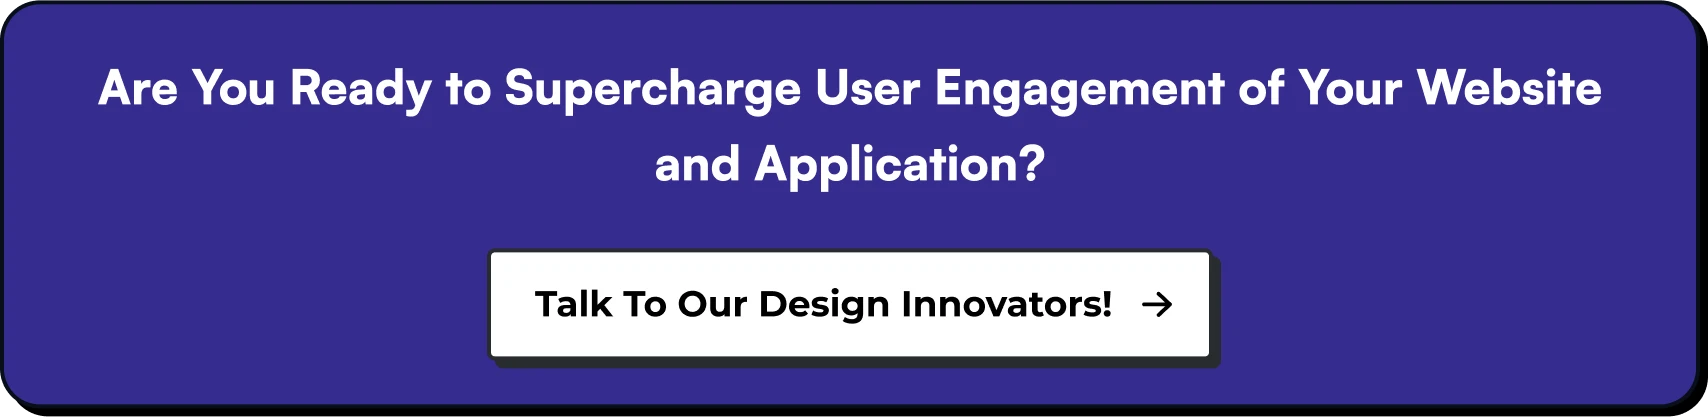 Are You Ready to Supercharge User Engagement of Your Website and Application